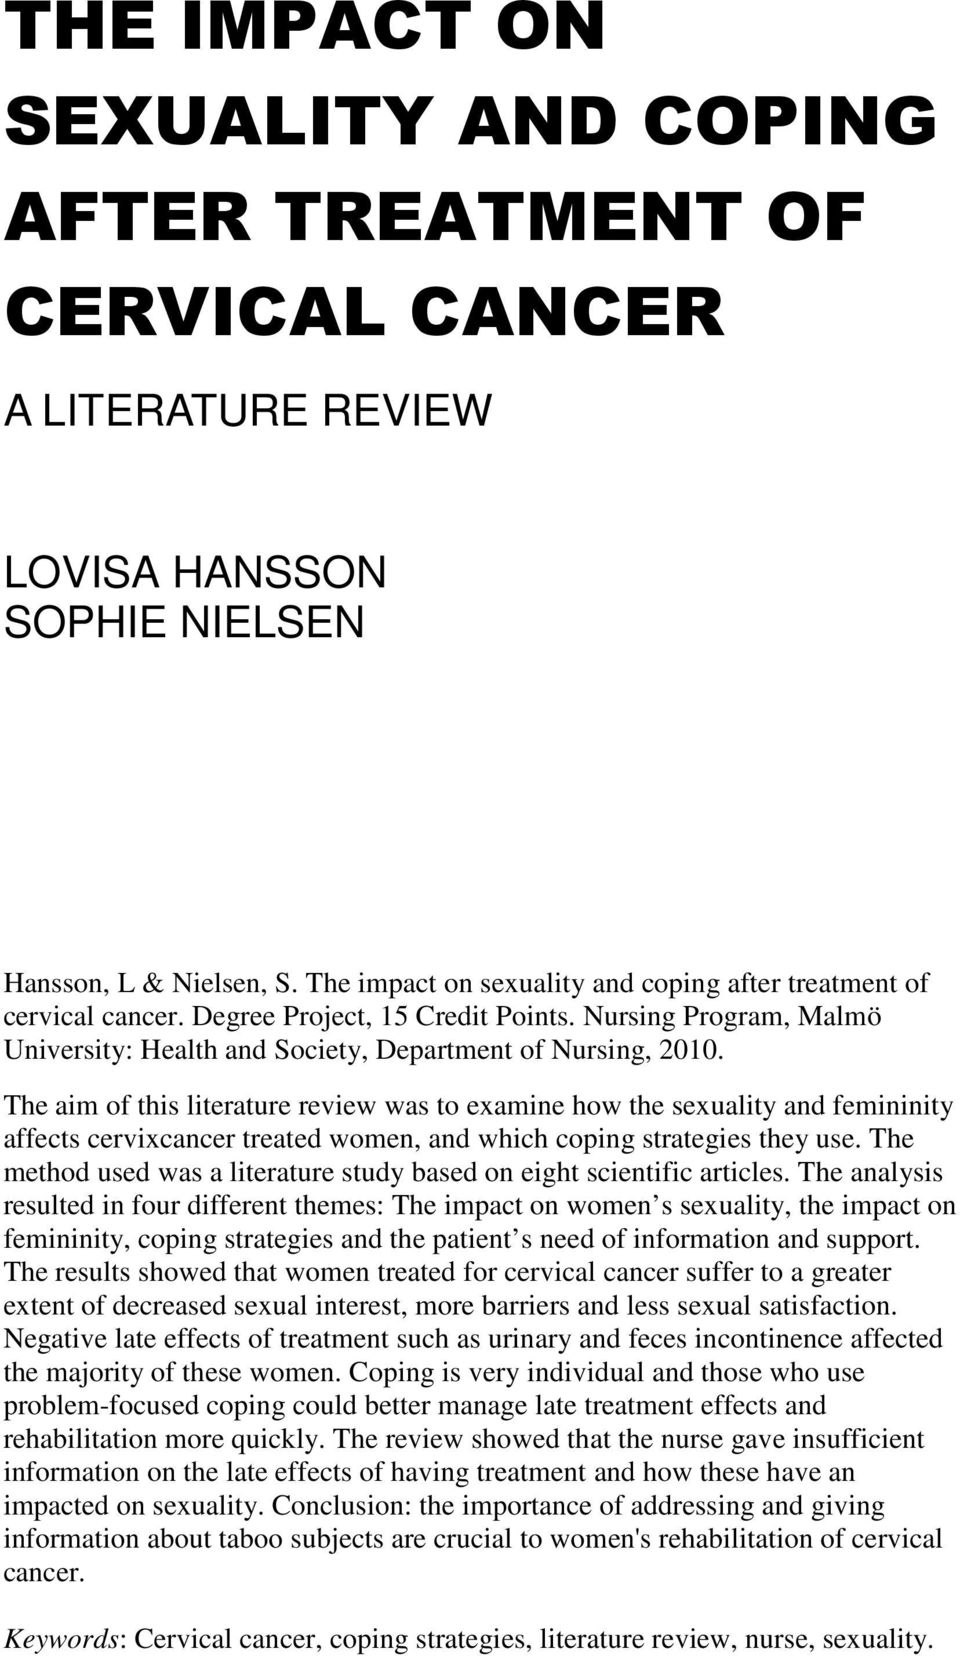 The aim of this literature review was to examine how the sexuality and femininity affects cervixcancer treated women, and which coping strategies they use.